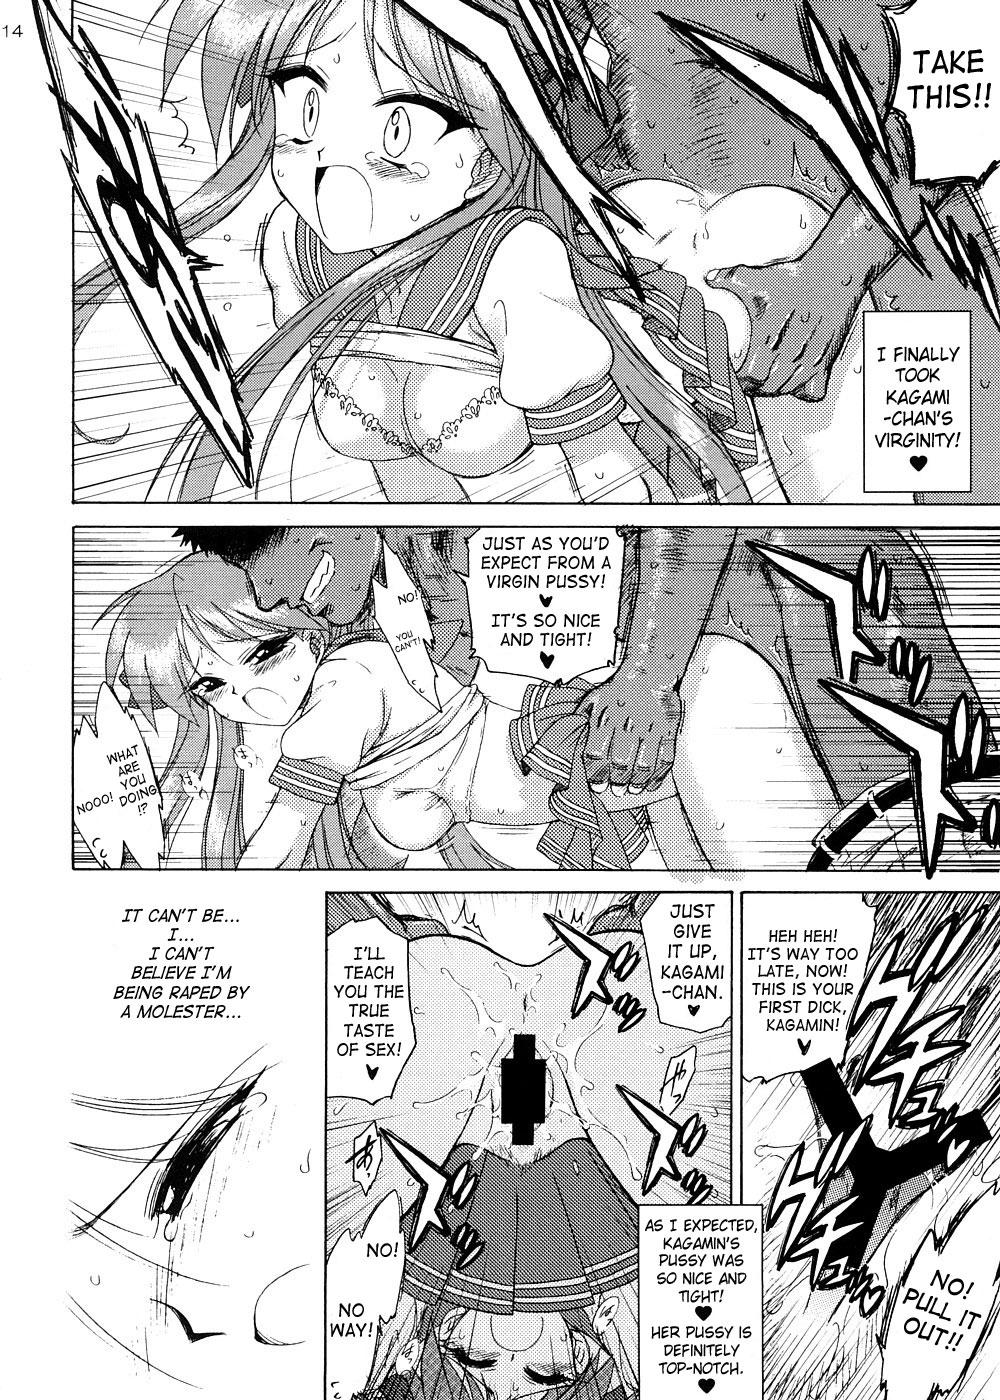 Best Blowjobs Man in the Mirror - Lucky star Fisting - Page 13